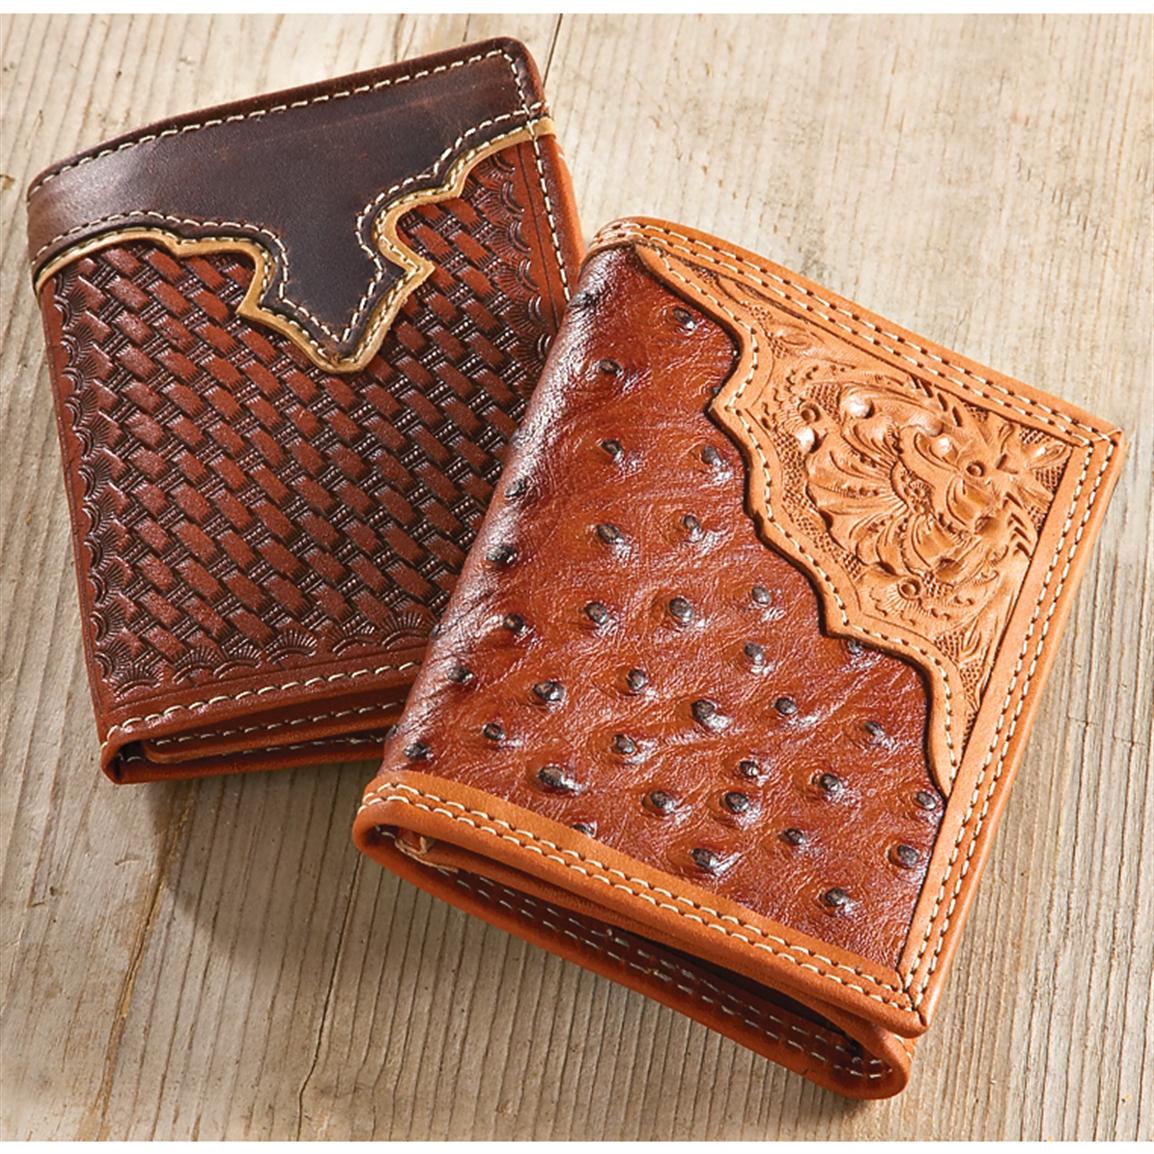 2 Hand - tooled Leather Wallets, 1 Ostrich - look / 1 Brown Weave - 184655, Wallets at Sportsman ...